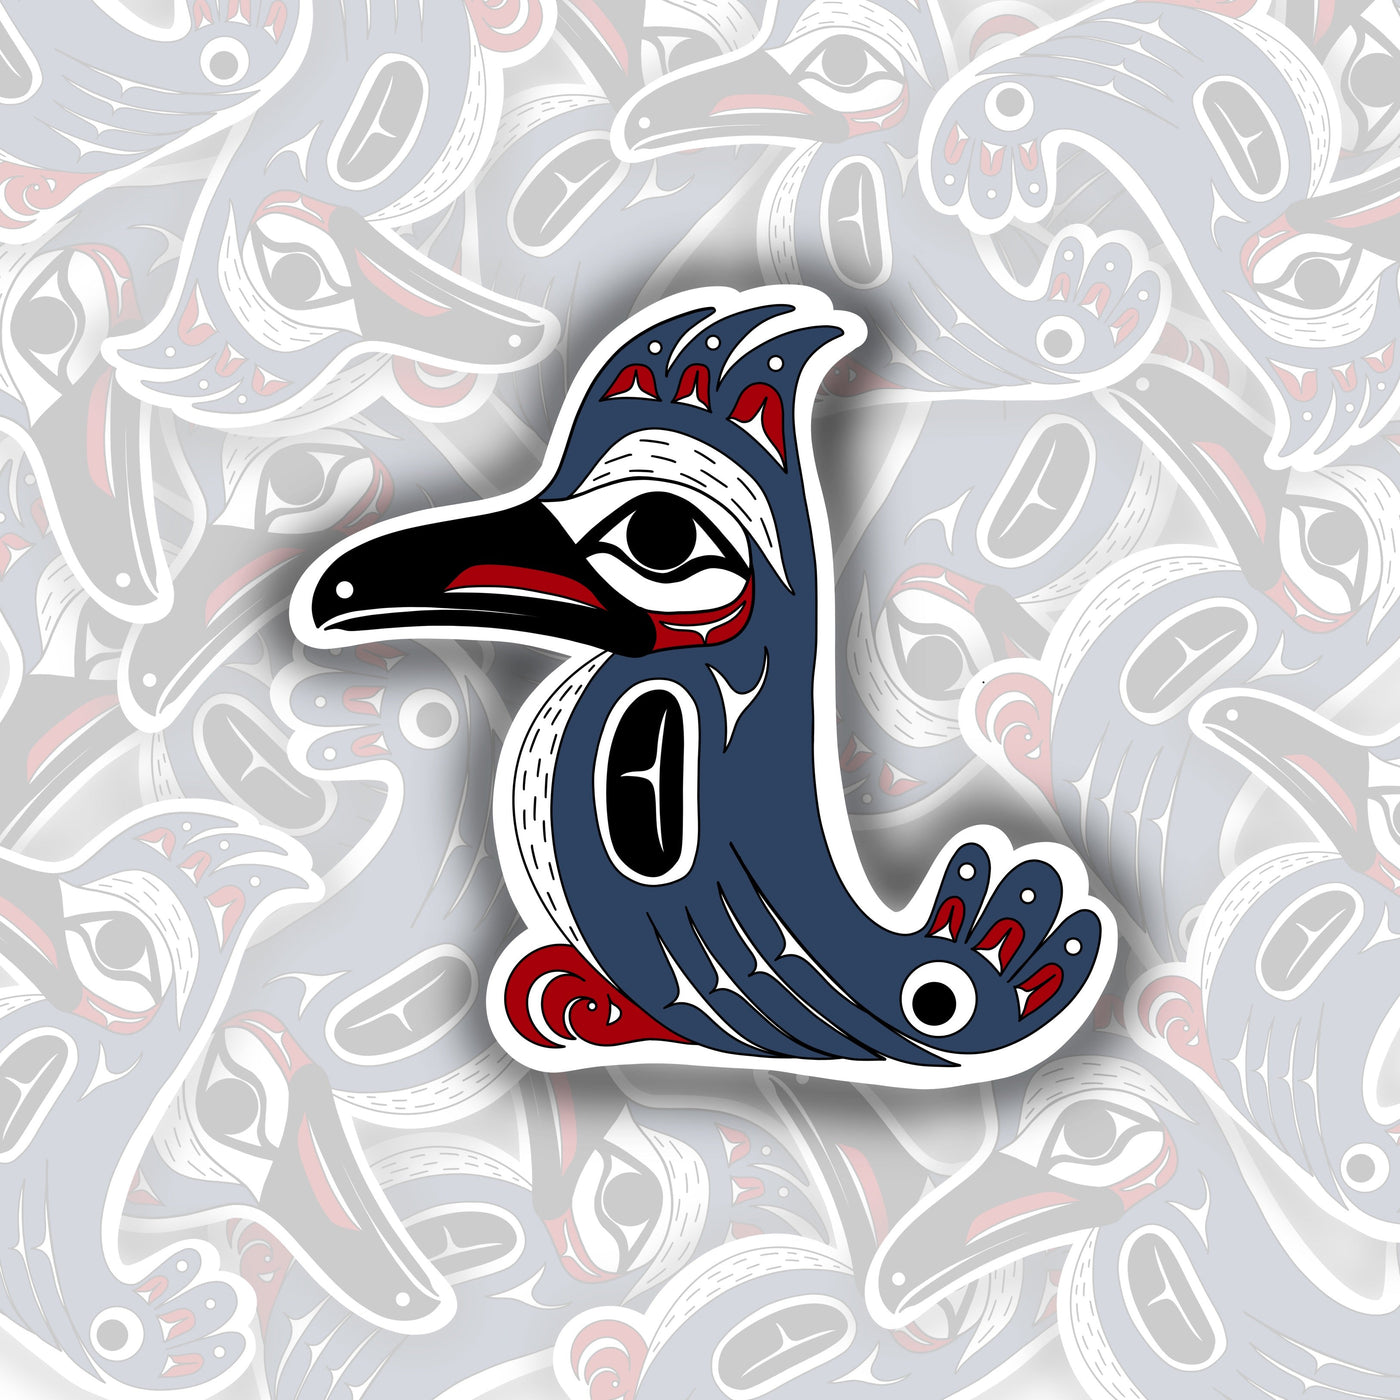 This sticker is of a kingfisher bird. it has a navy blue body, with red accents. the bird is facing to the left with a long, pointy black beak, slightly open. the red claws are at the bottom of the sticker, curled slightly under. there is a tail feather curling upwards on the right side of the sticker. three tufts of hair are on the top representing ear feathers.